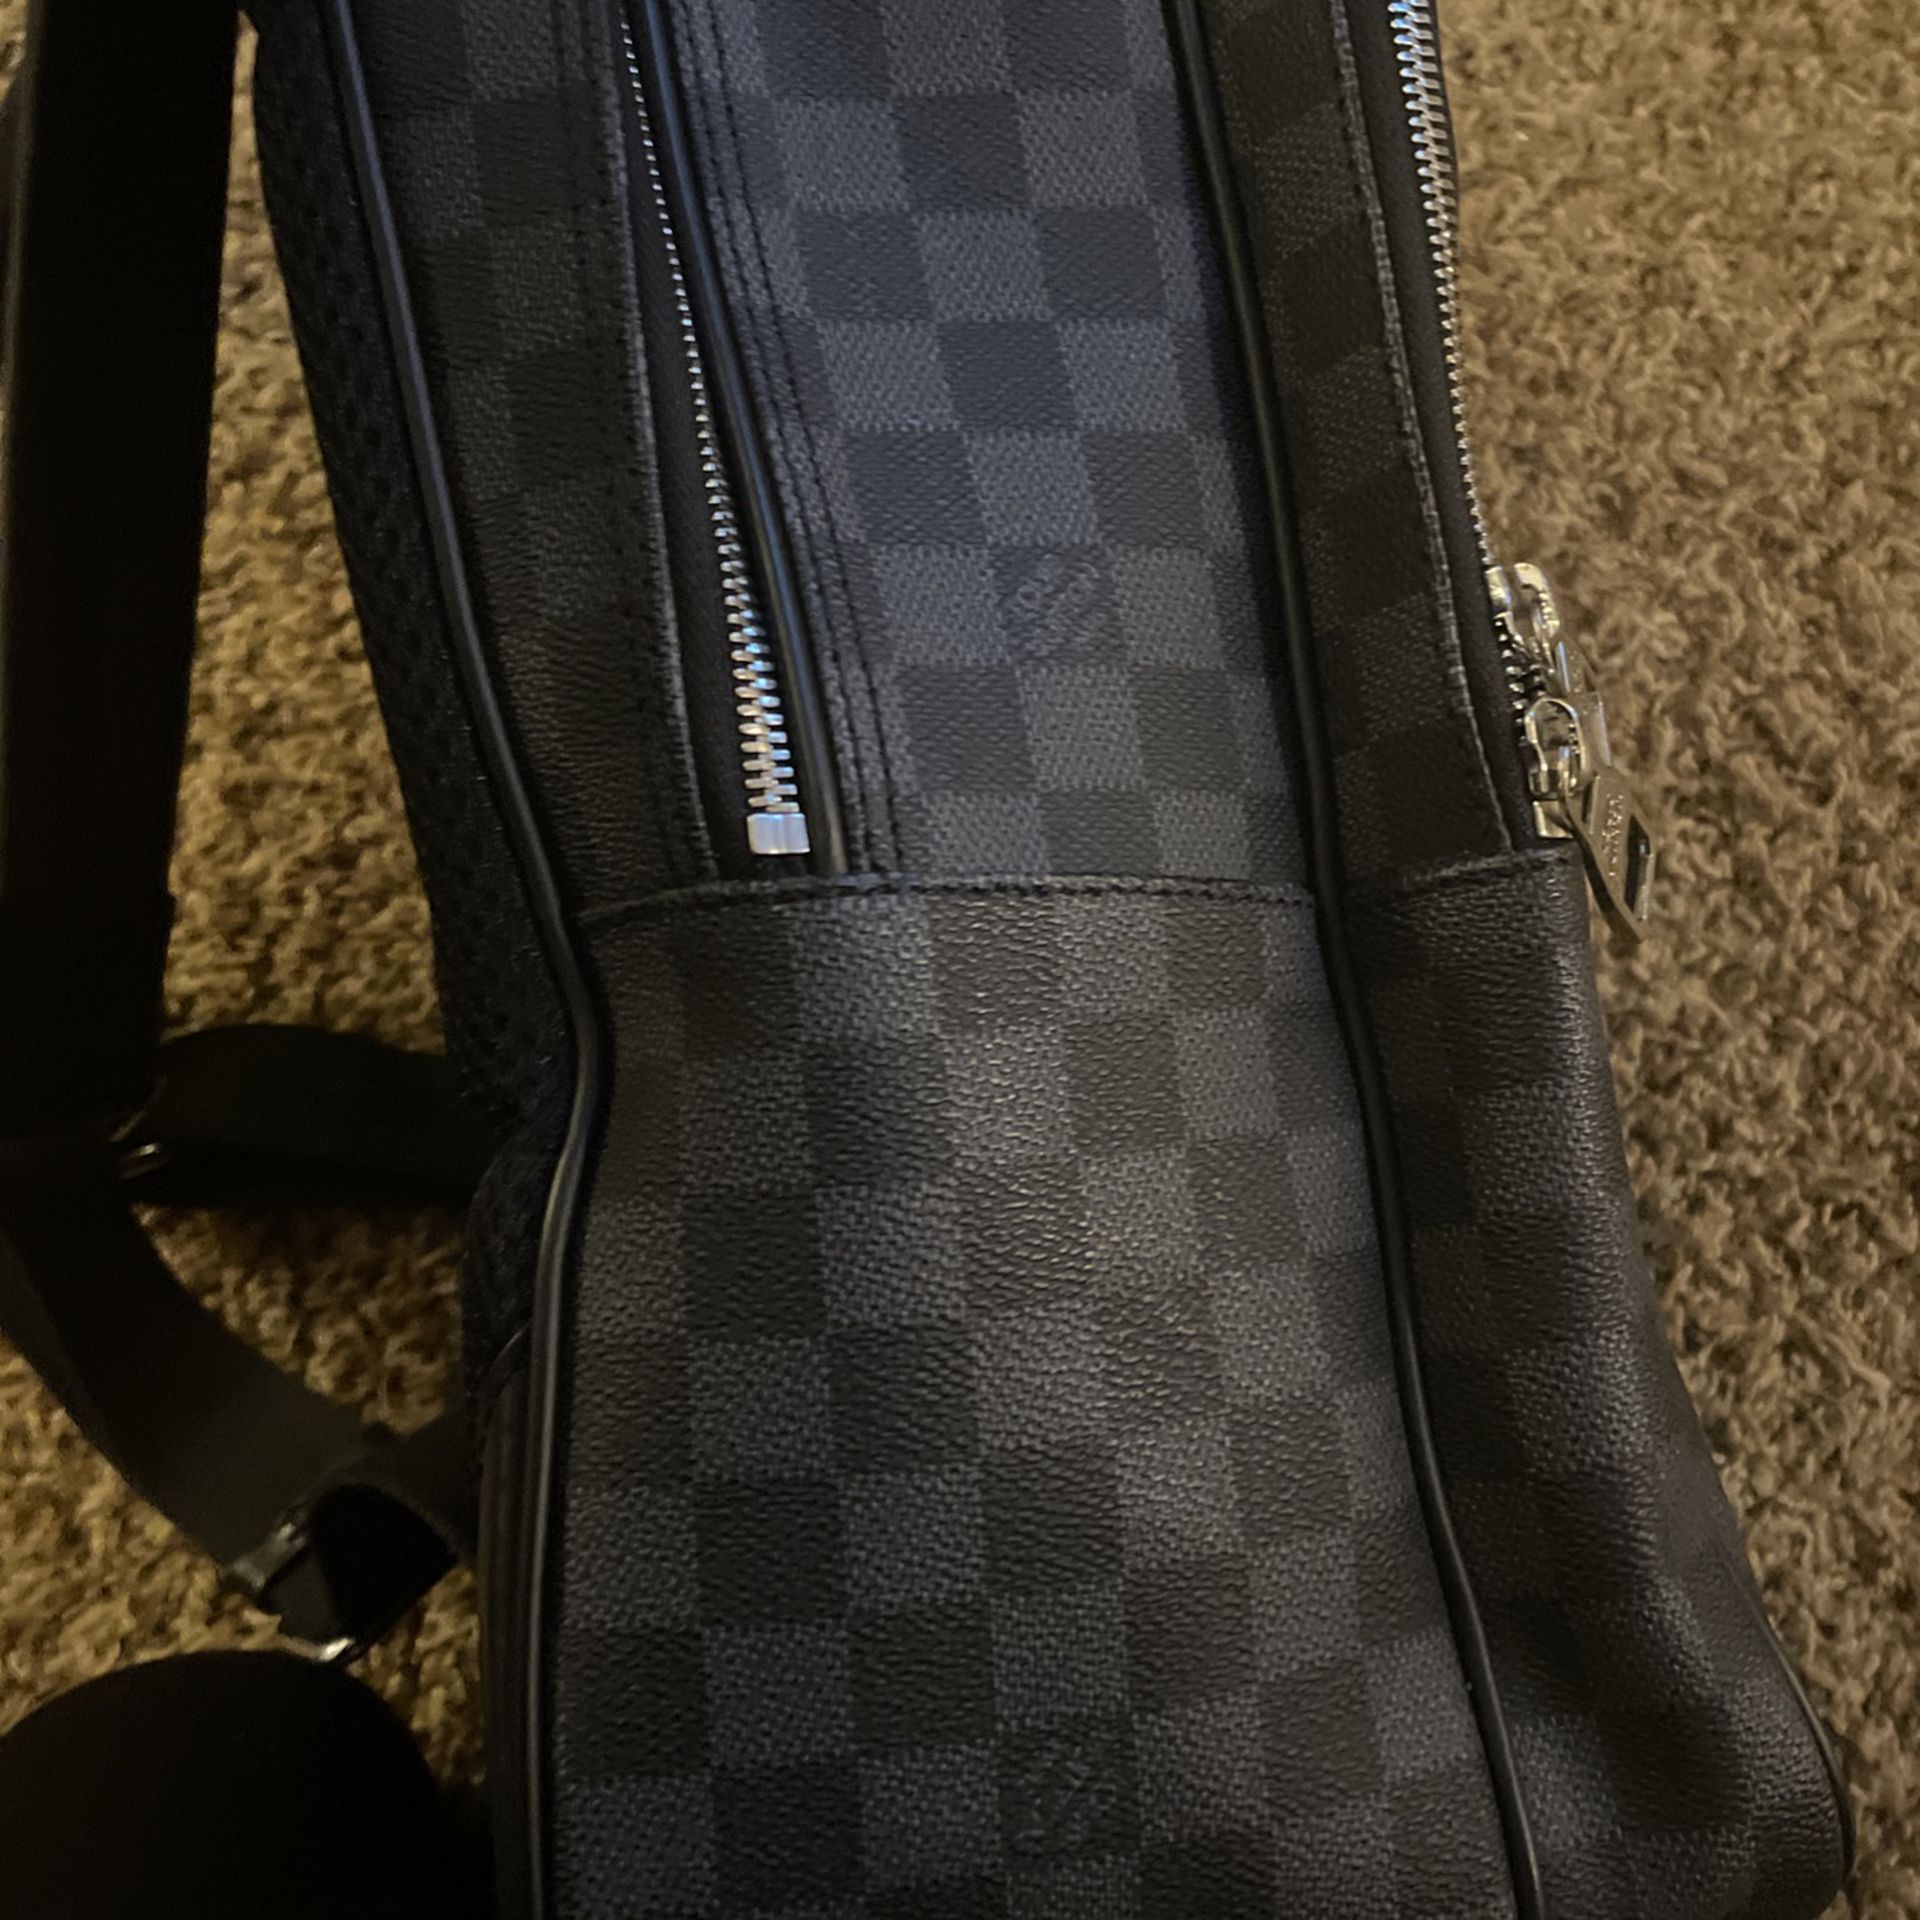 Louis Vuitton Backpack Like New for Sale in Bend, OR - OfferUp